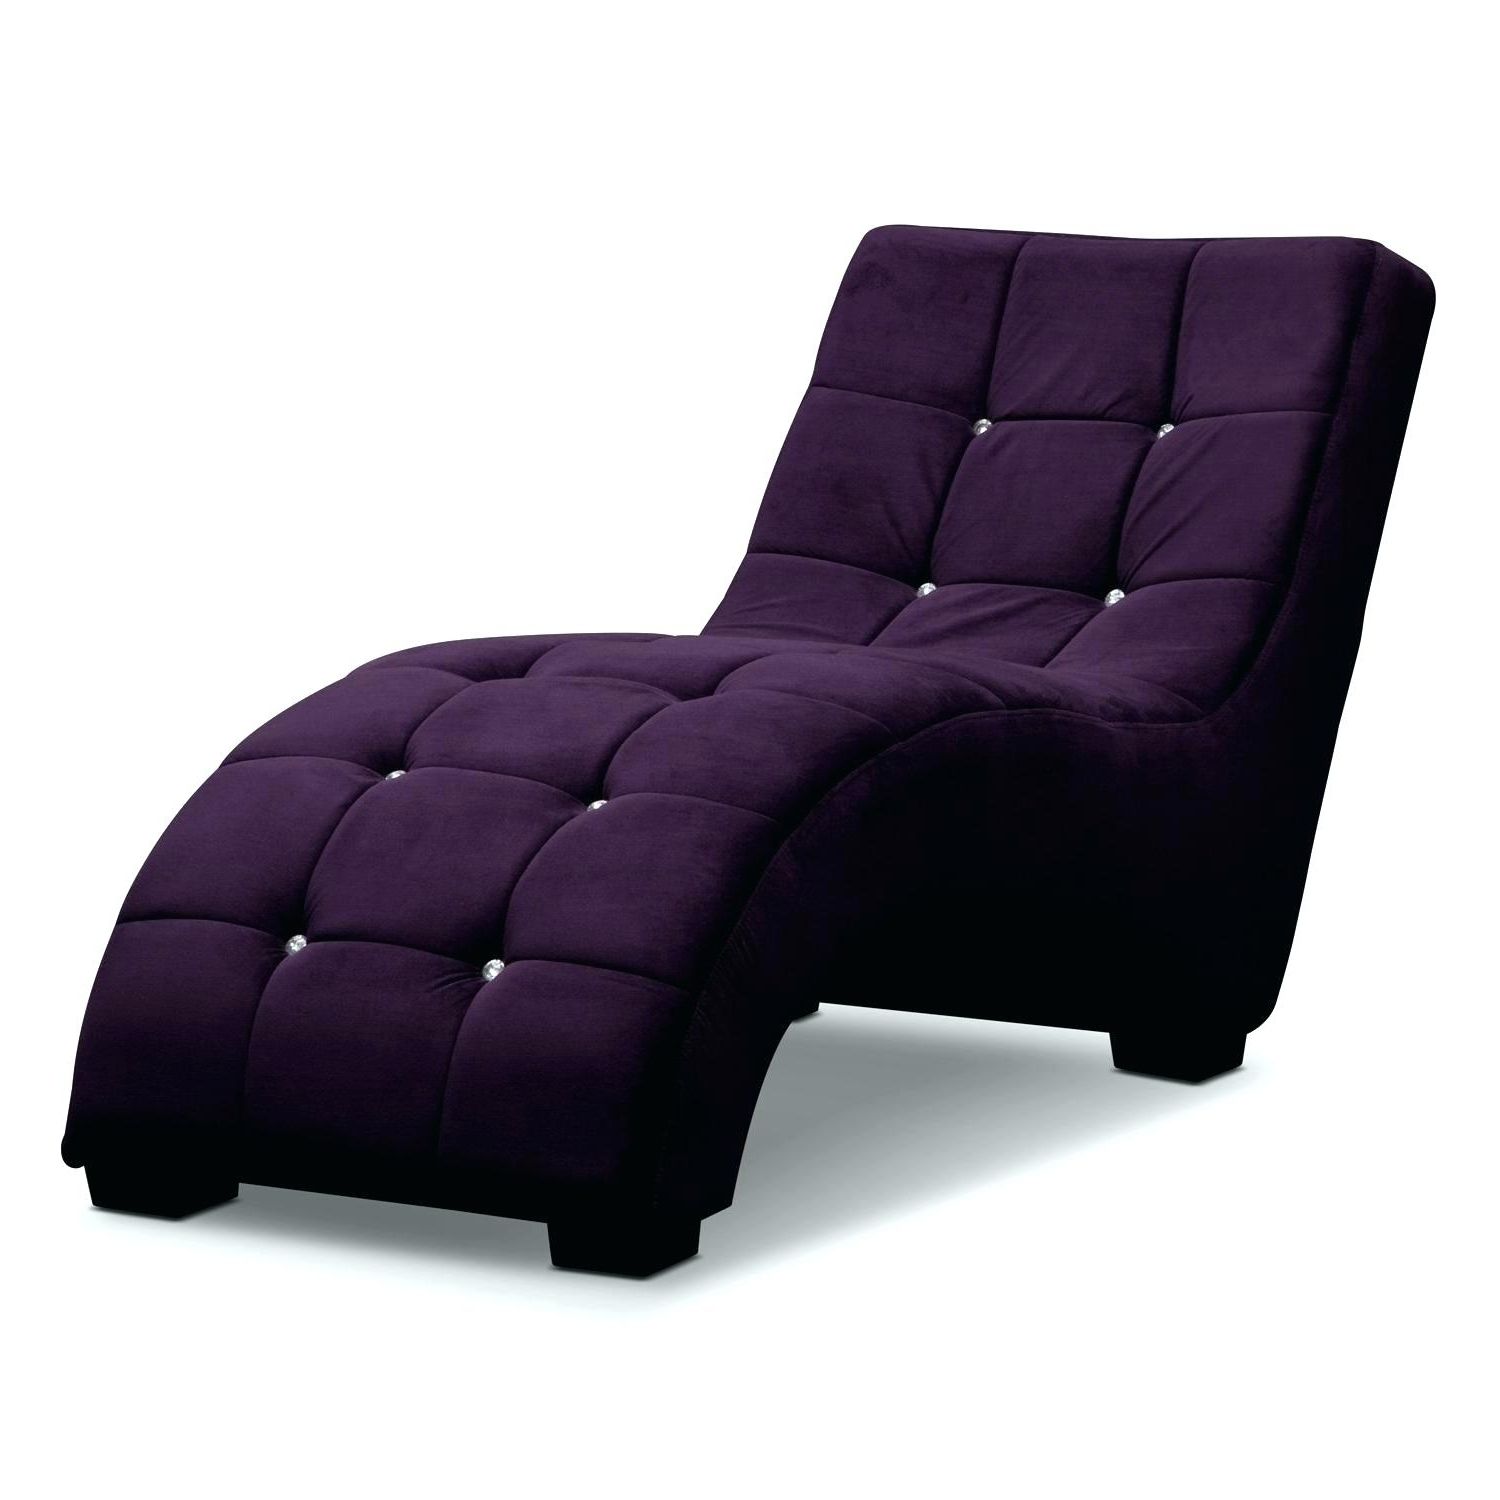 15 Best Ideas of Alessia Chaise Lounge Tufted Chairs